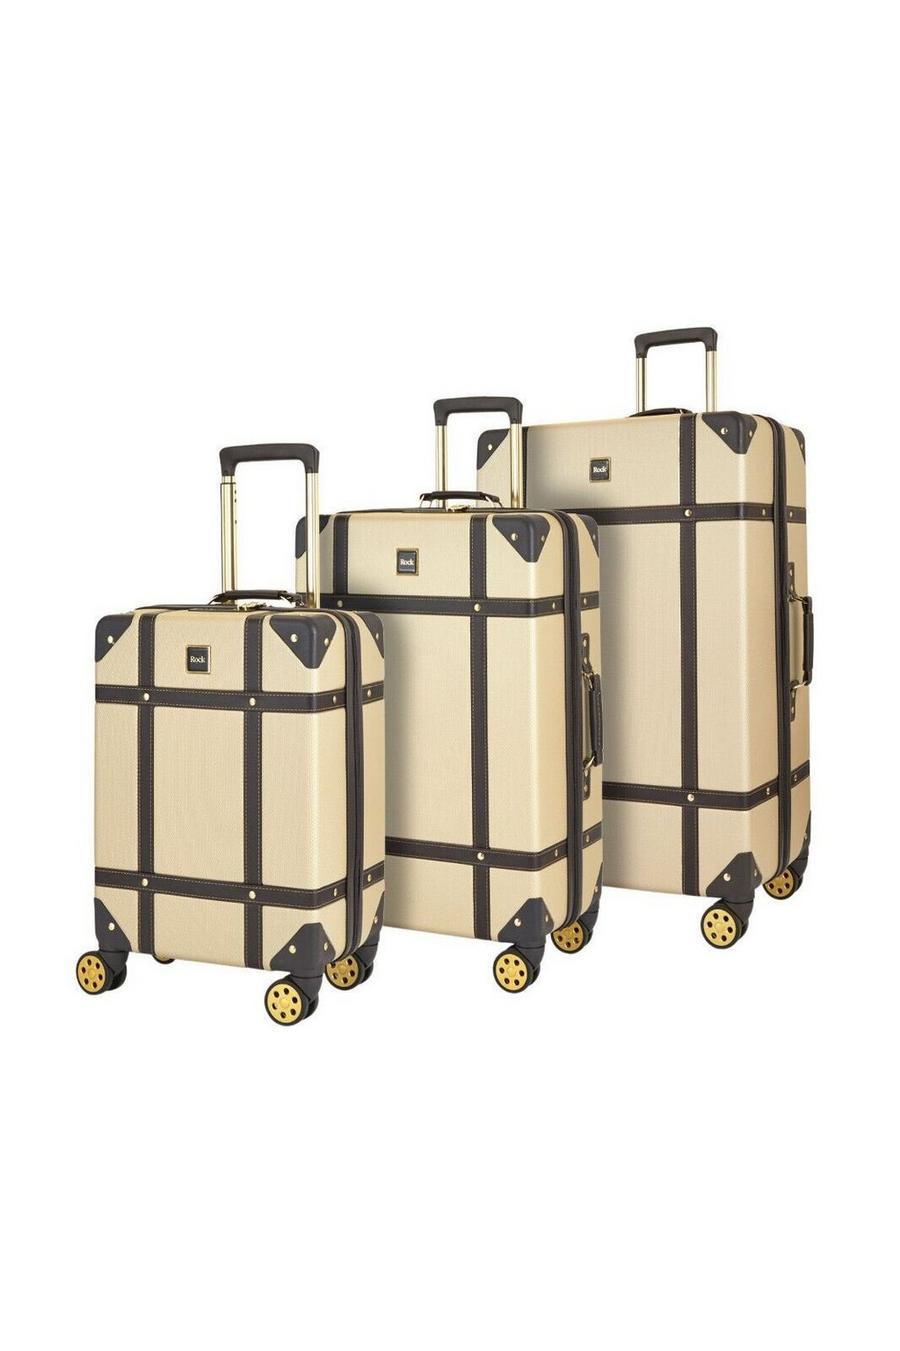 Gold Vintage Hard Shell Luggage Suitcase Trunk Cabin Travel Bags